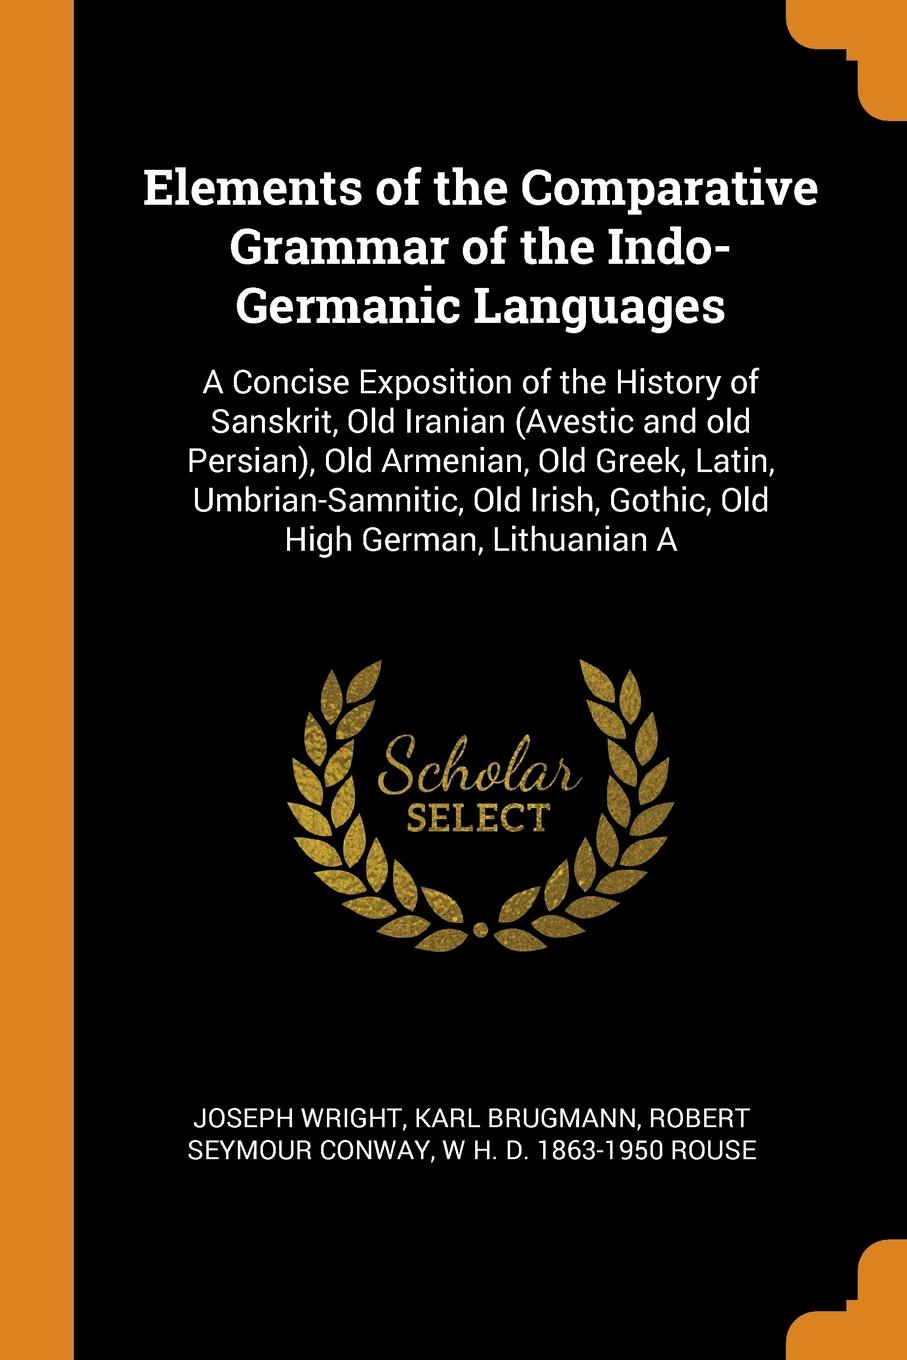 Elements of the Comparative Grammar of the Indo-Germanic Languages. A Concise Exposition of the History of Sanskrit, Old Iranian (Avestic and old Persian), Old Armenian, Old Greek, Latin, Umbrian-Samnitic, Old Irish, Gothic, Old High German, Lithu...